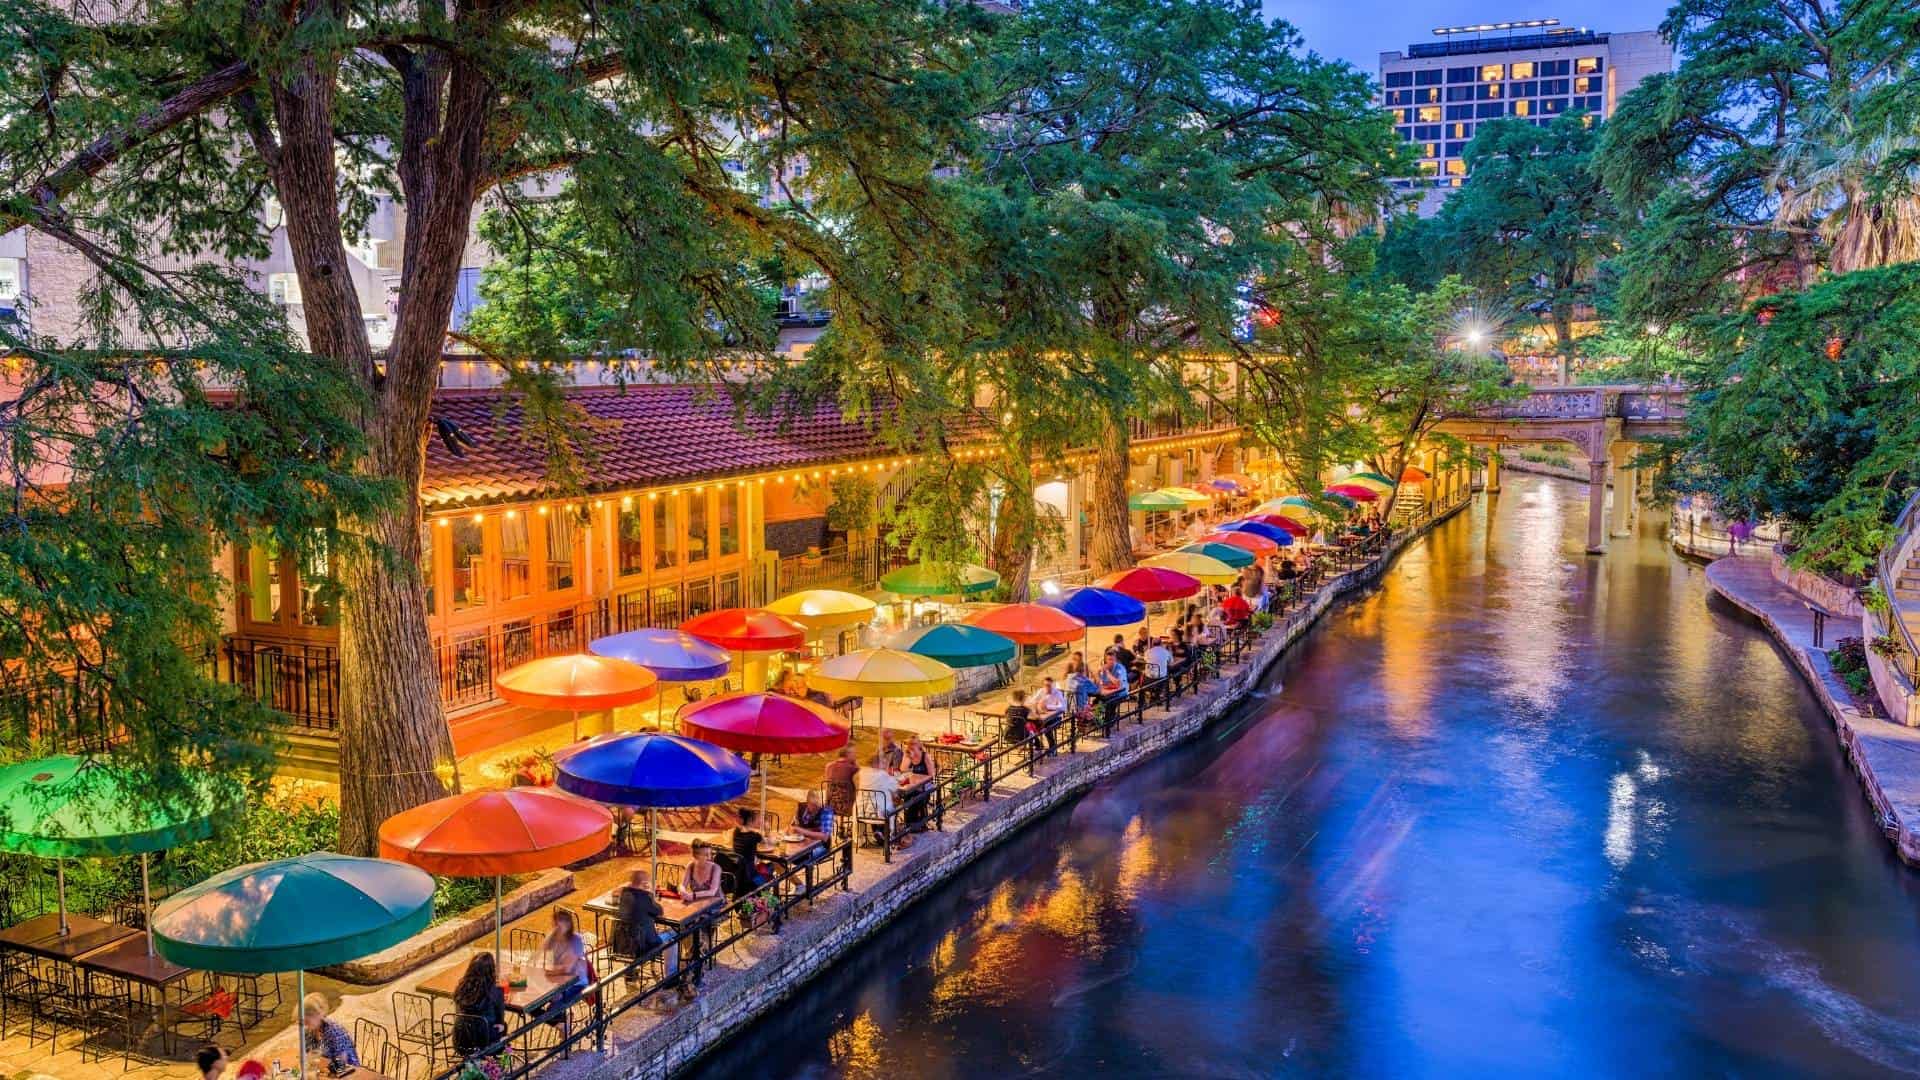 10 Fun Things to do in San Antonio with Kids on a Family Vacation